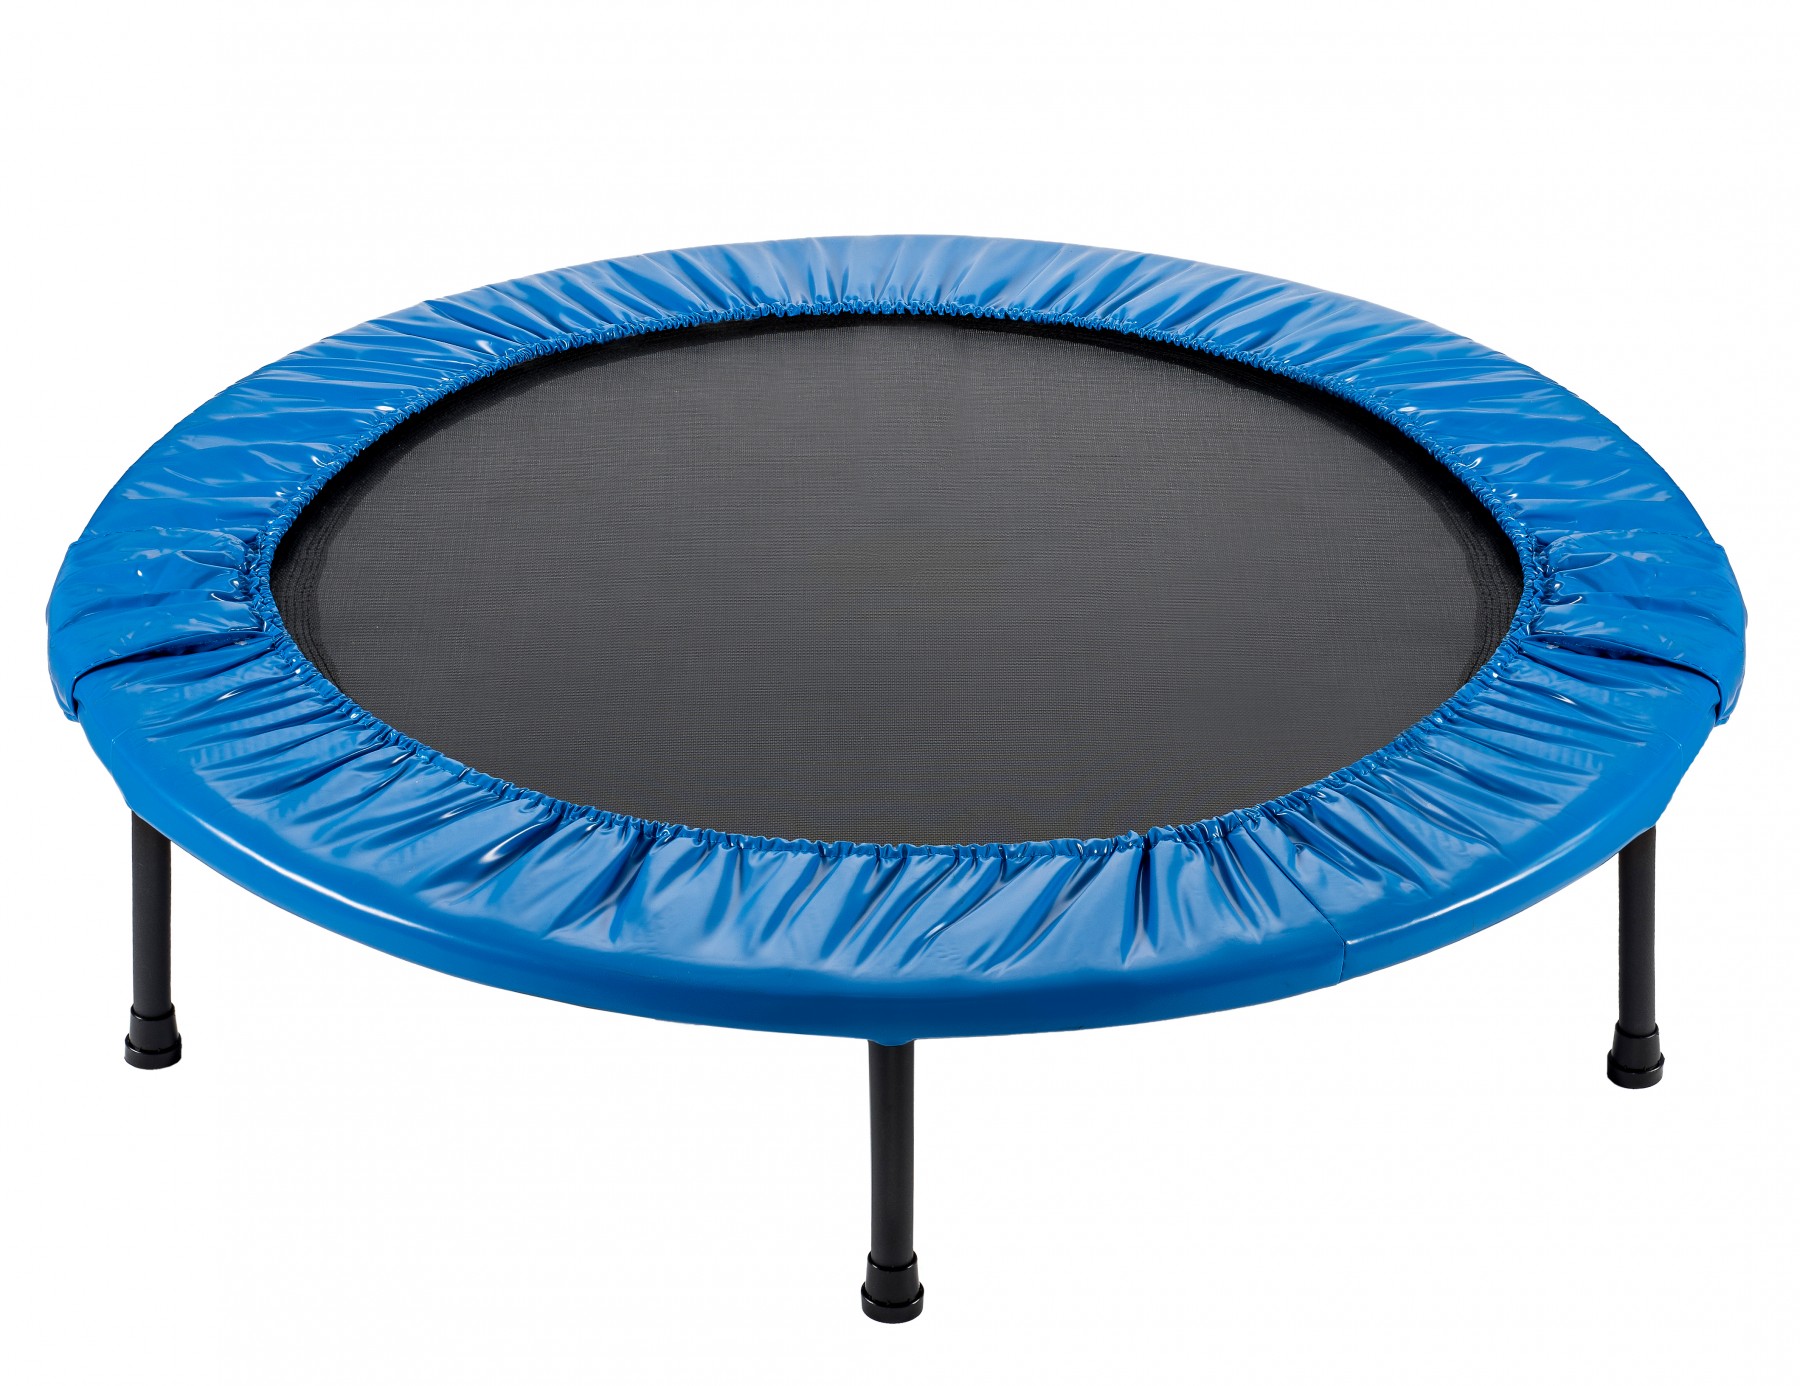 Blue Spring Cover for 6 Legs 36 Mini Round Foldable Replacement Trampoline Safety Pad 